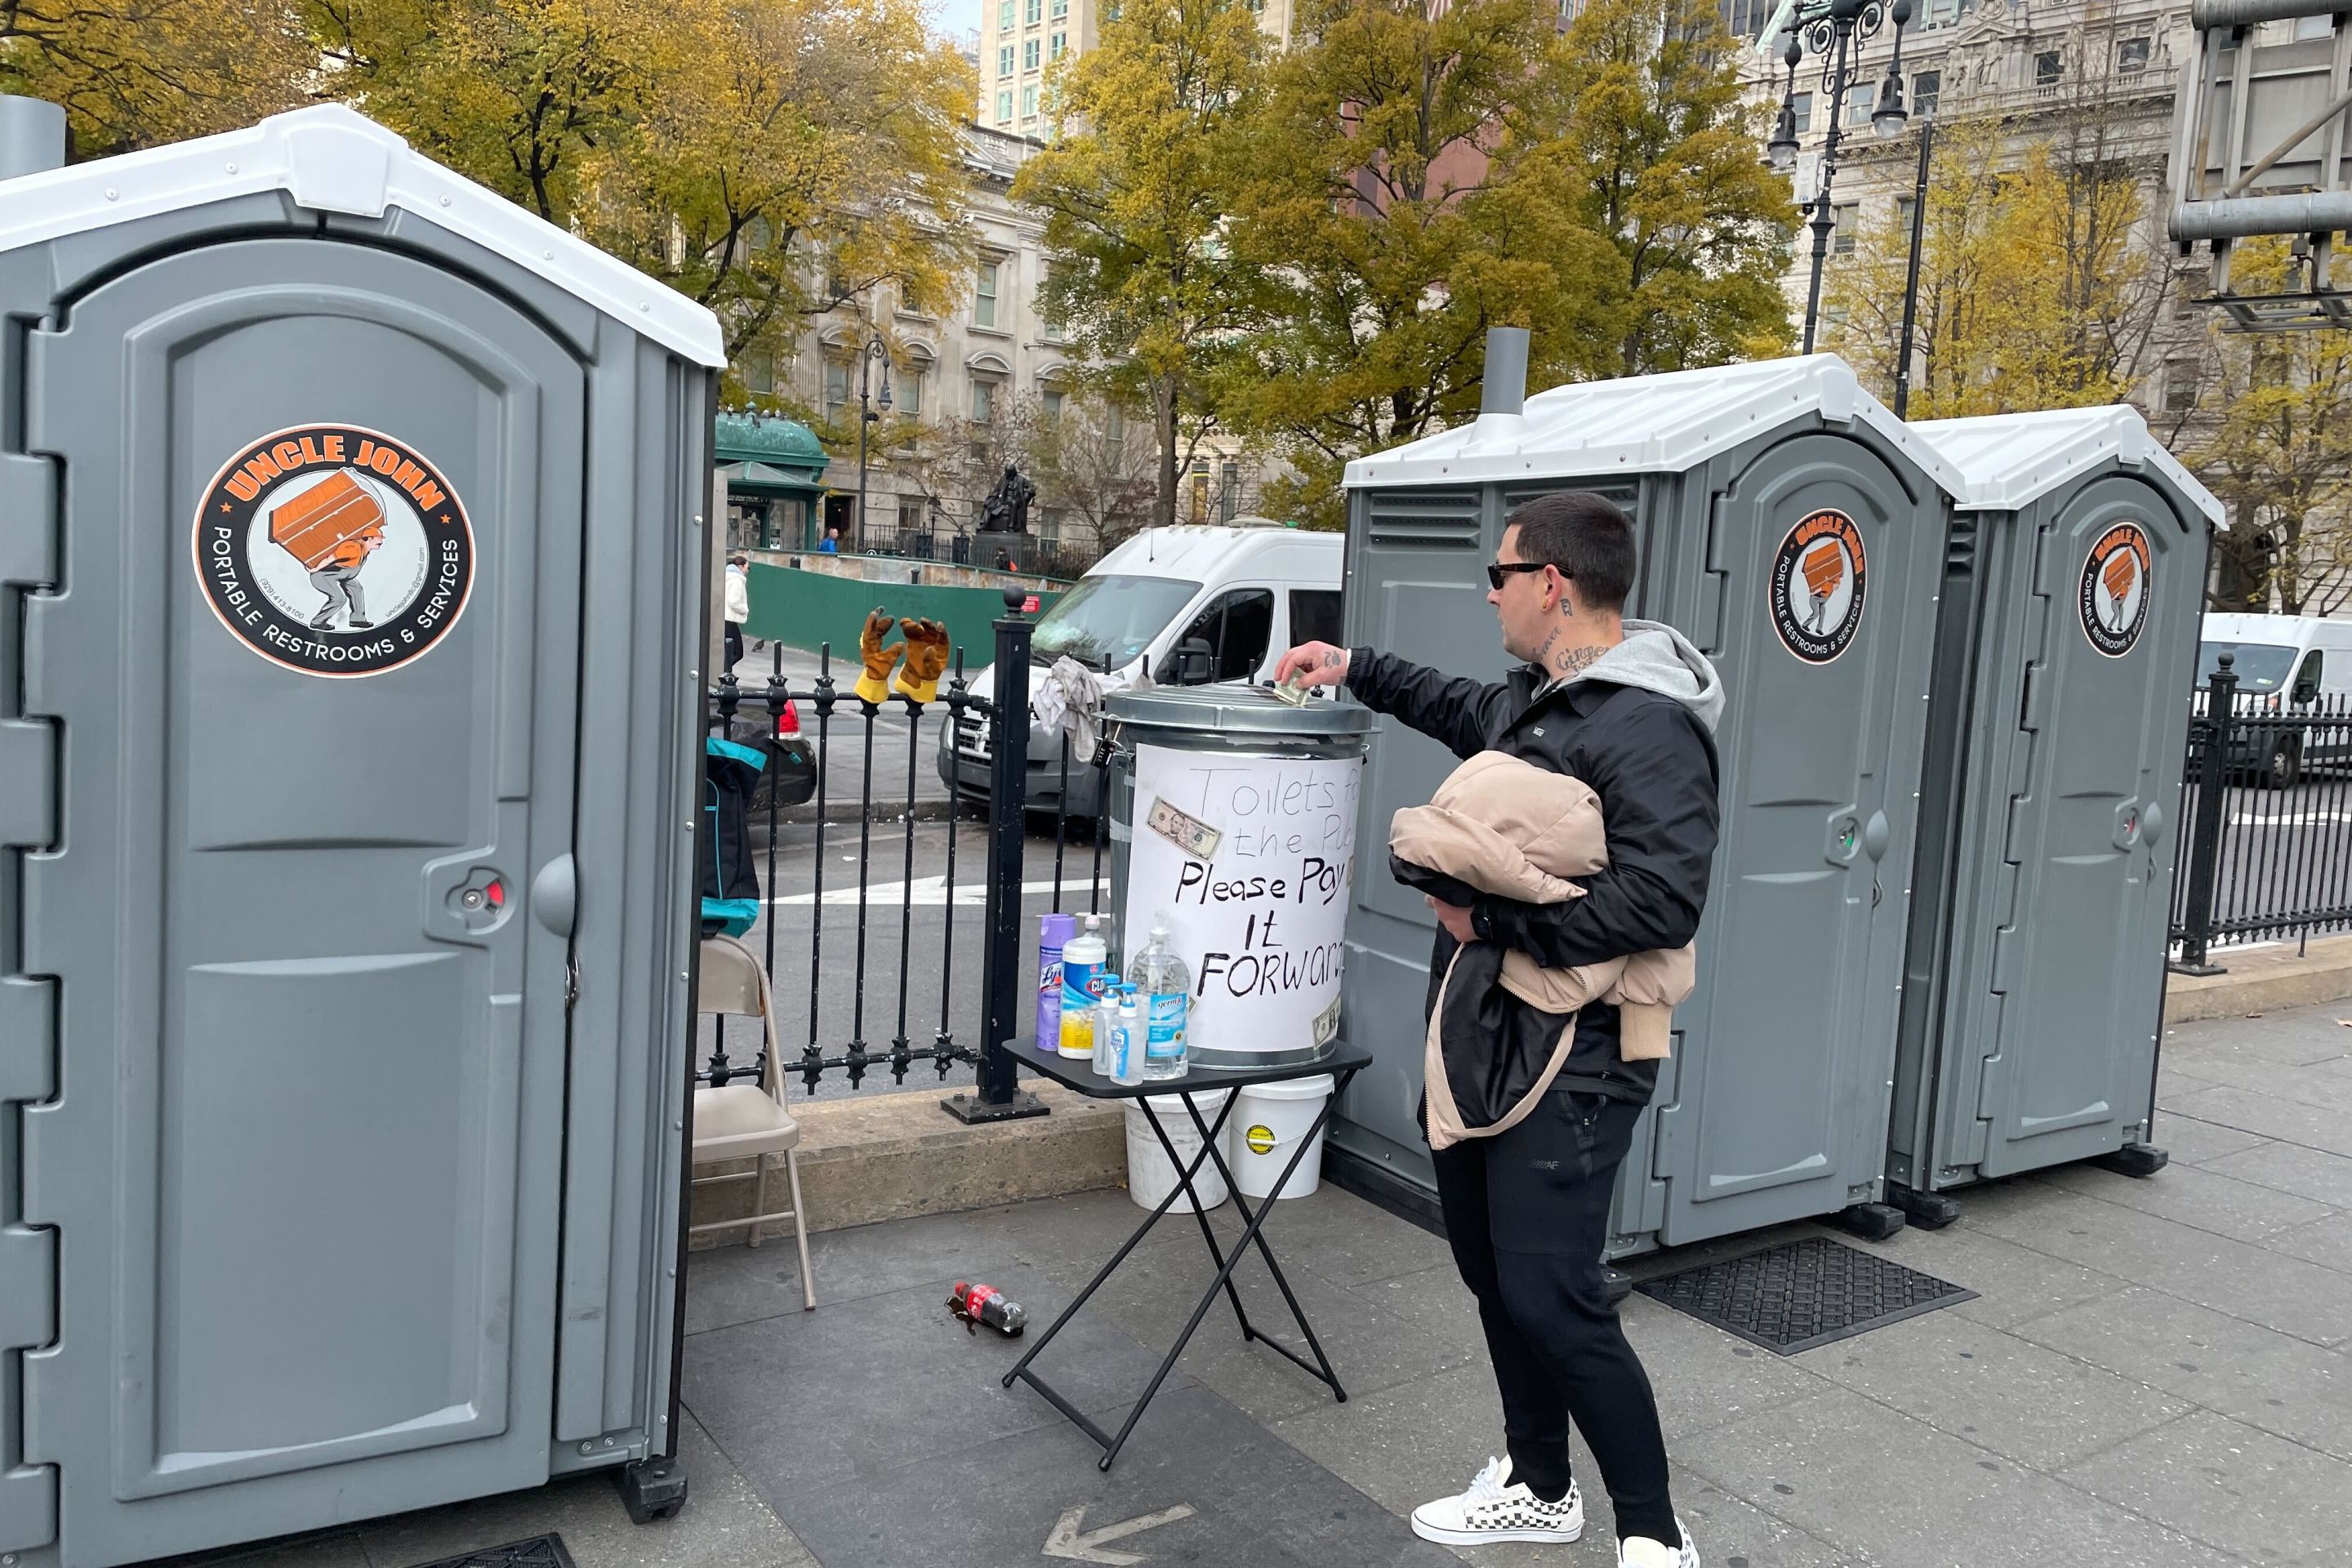 A man places a dollar bill into a trash can-turned-tip jar before using one of the port-a-potties at the base of the Brooklyn Bridge.